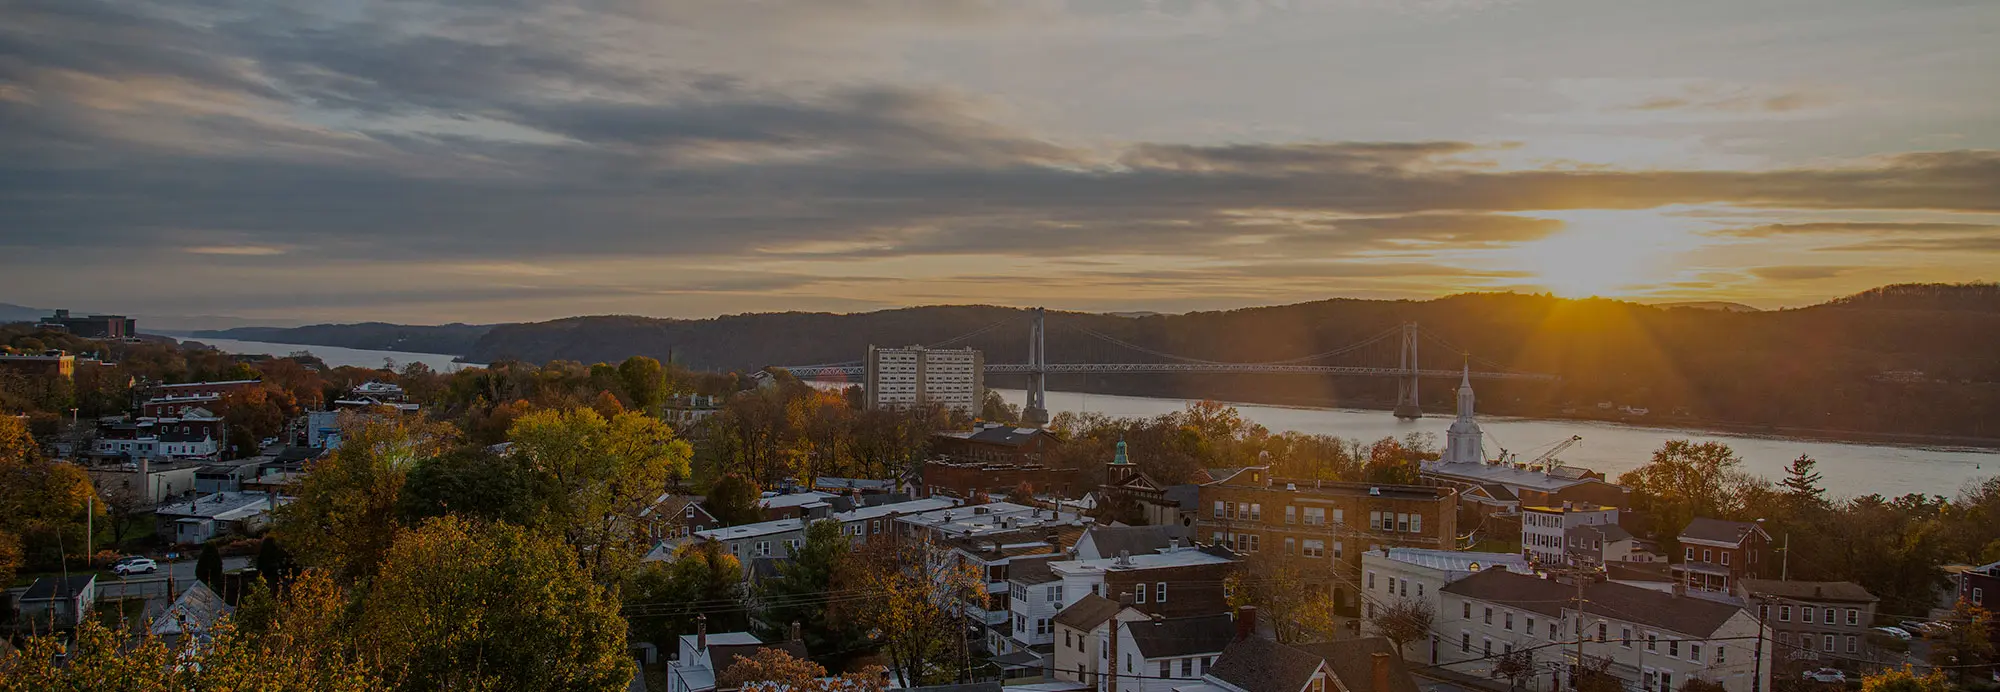 An aerial view of the city of Poughkeepsie at sunset.